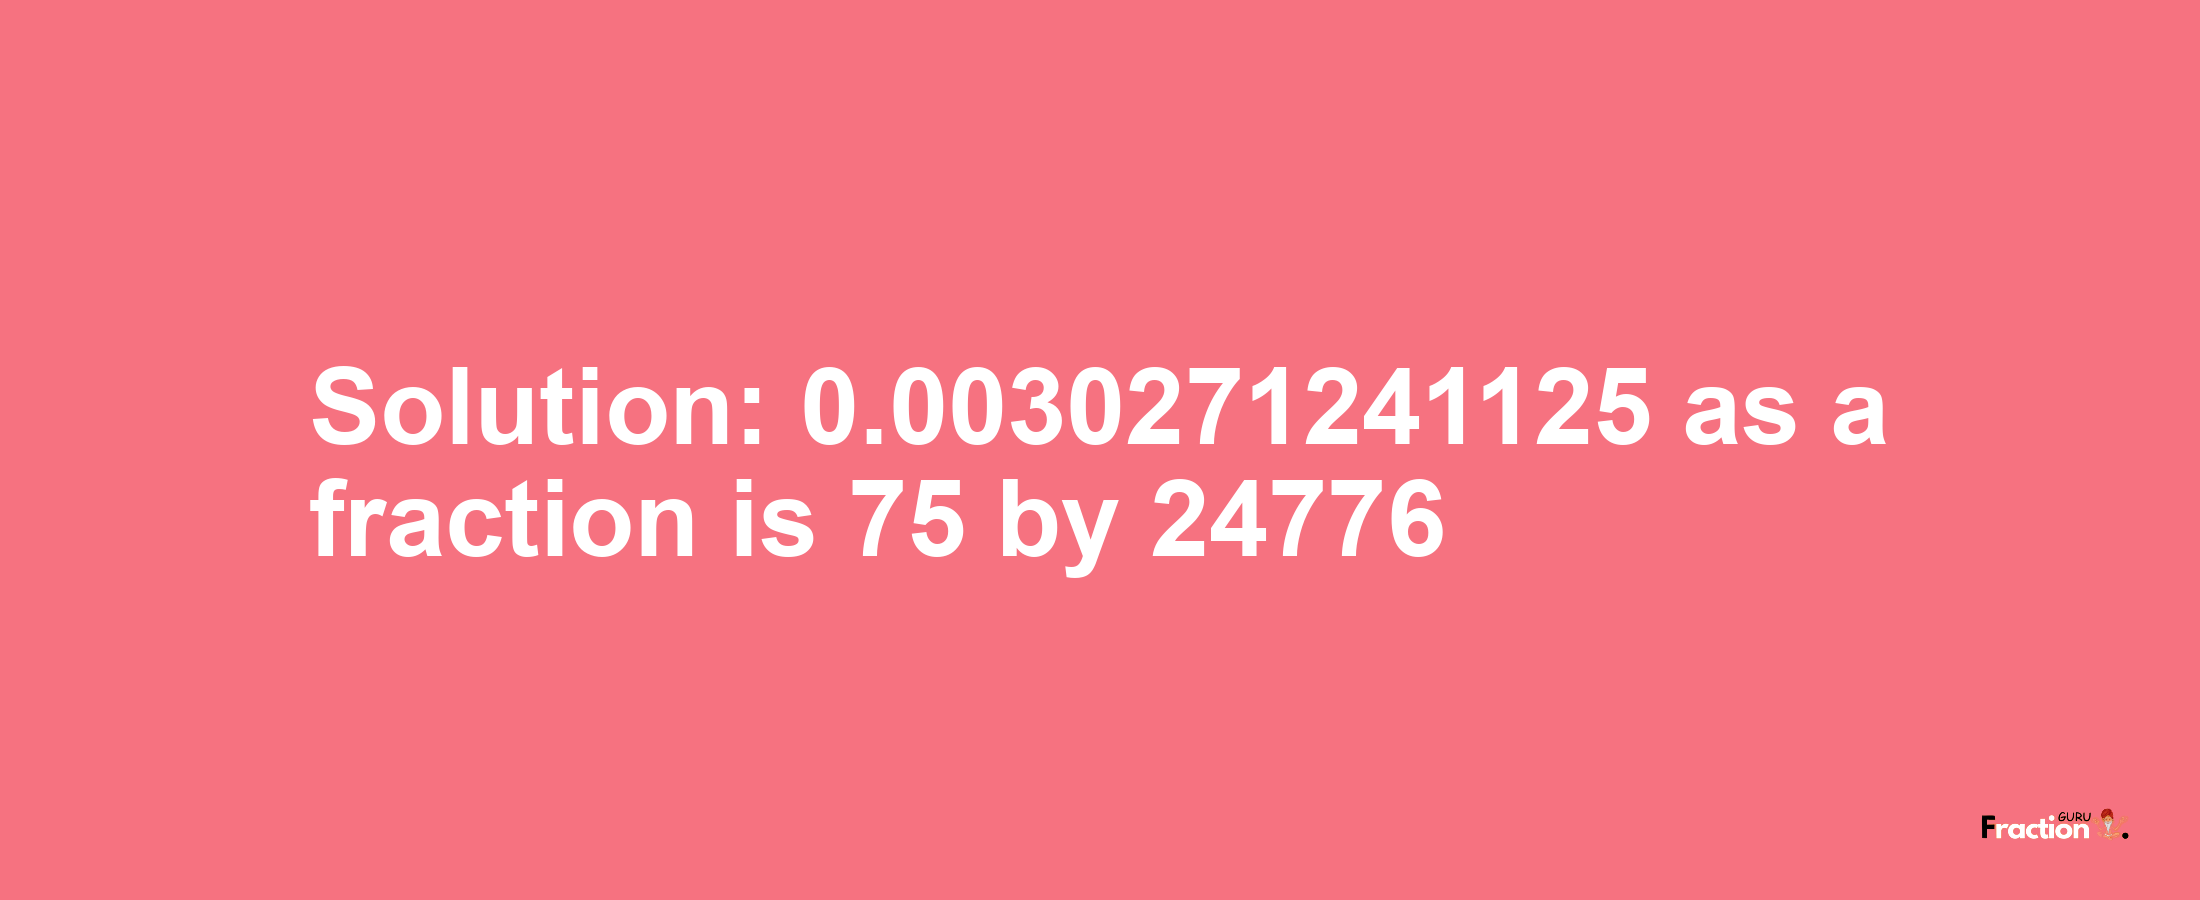 Solution:0.0030271241125 as a fraction is 75/24776